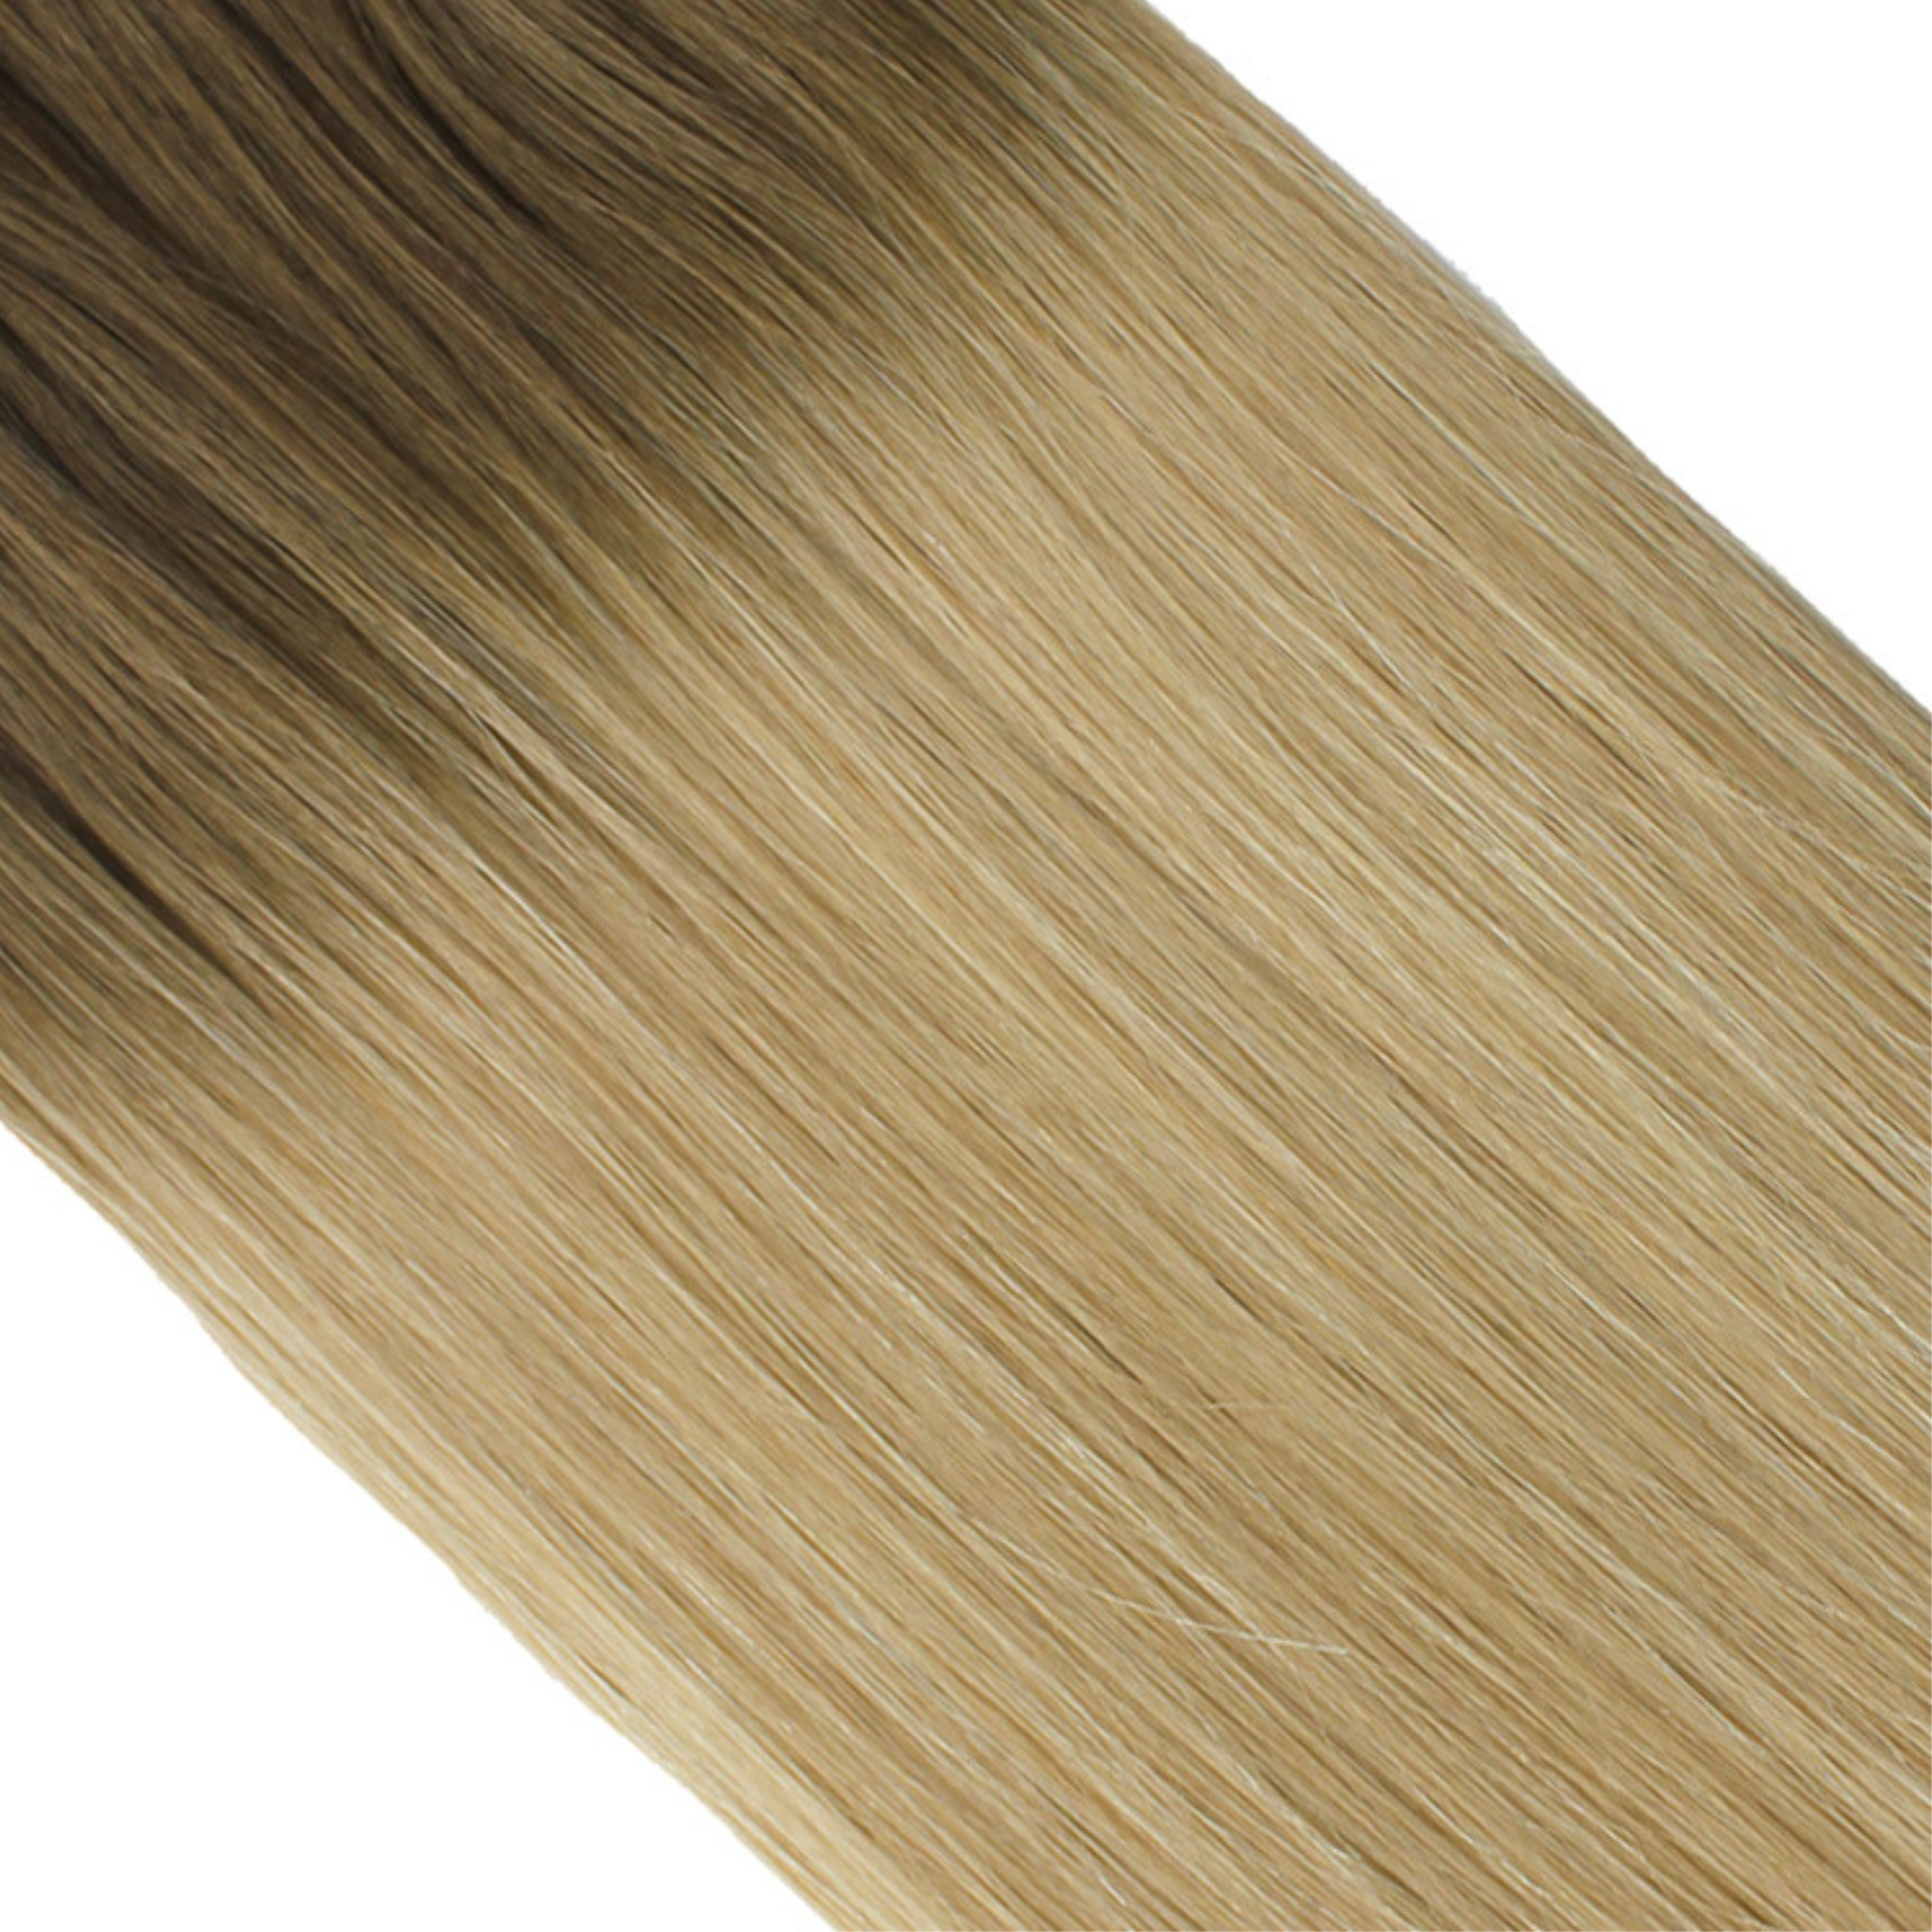 "hair rehab london 14" weft hair extensions shade swatch titled rooted dirty blonde"